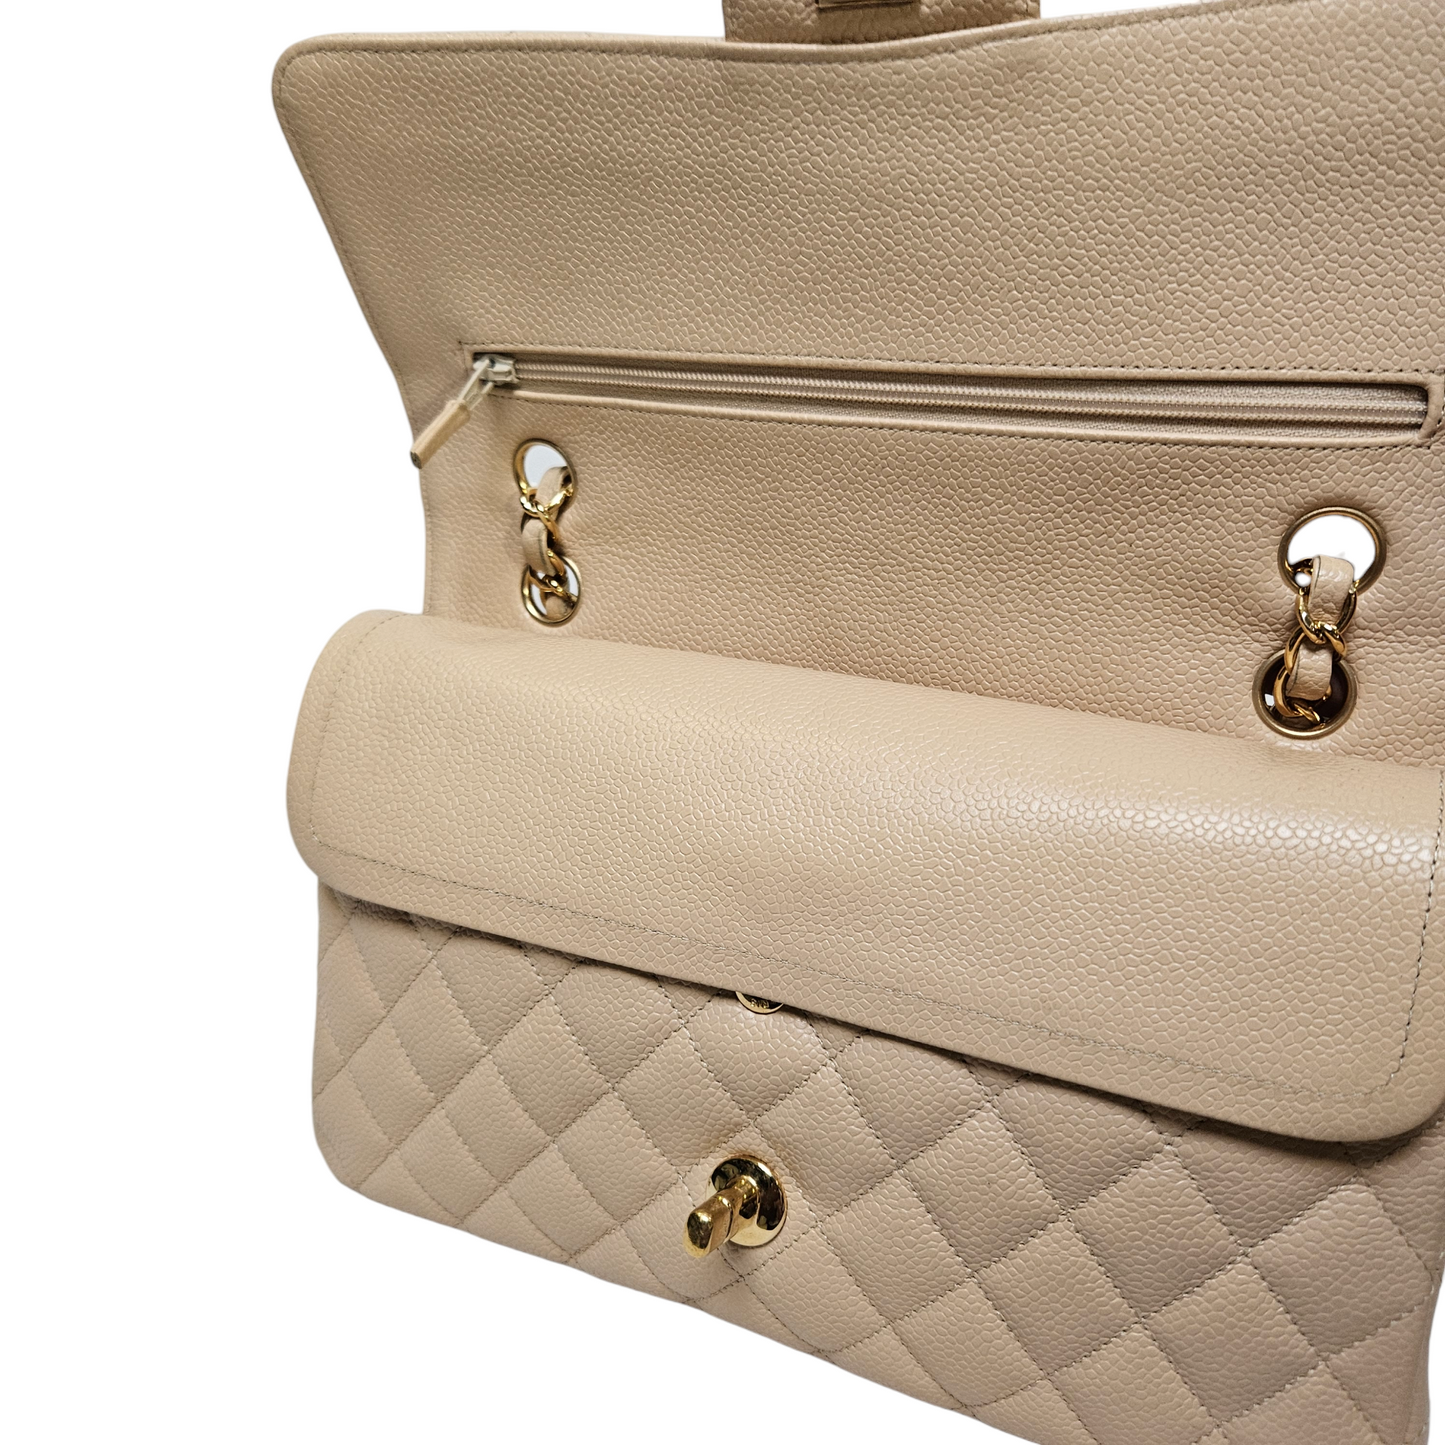 Chanel Classic Medium Double Flap Bag in Beige Caviar Leather